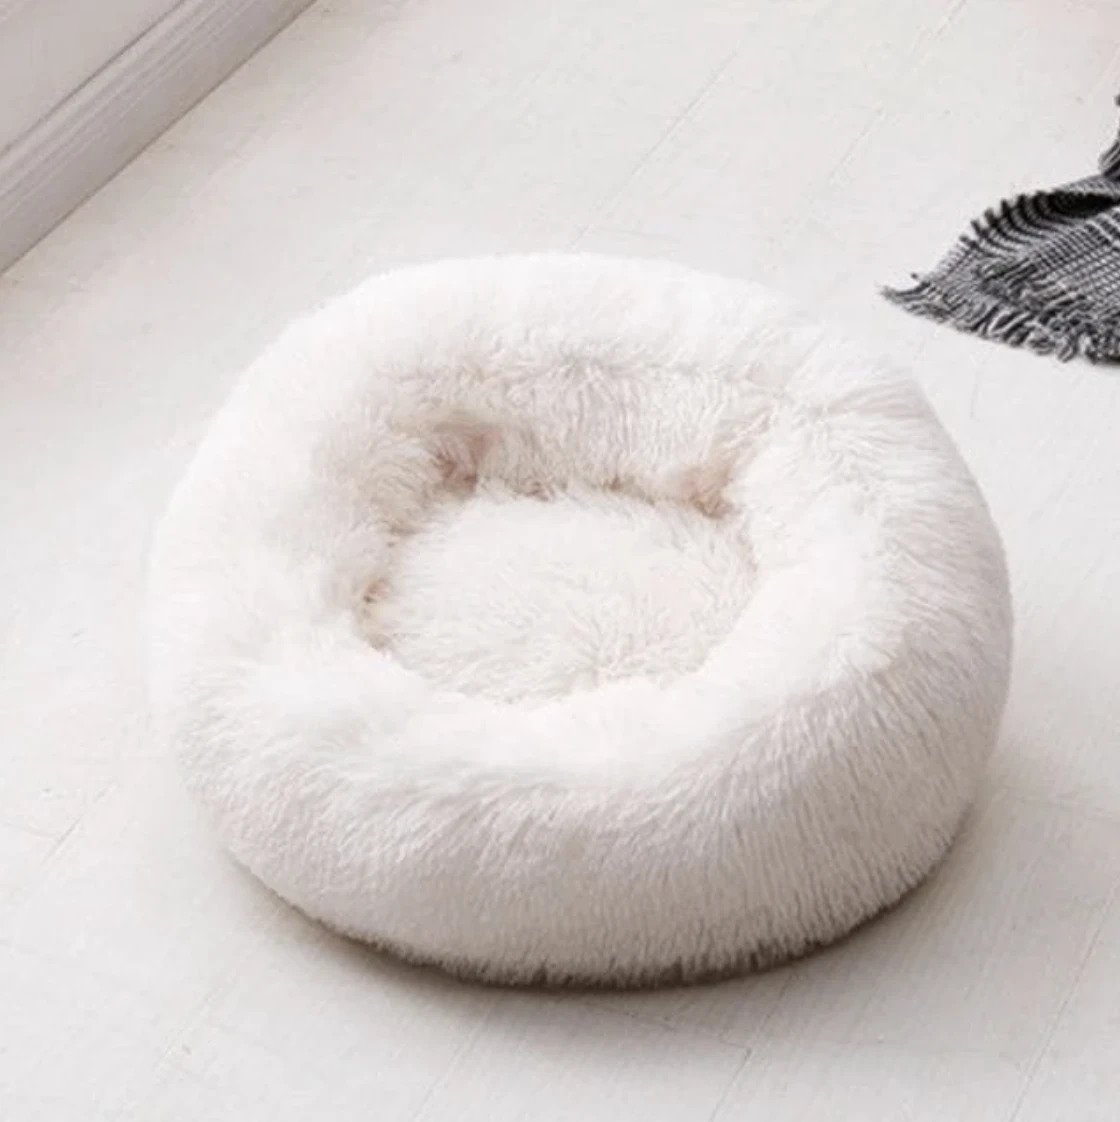 White Chewy Vuiton Paris Funny Parody Pet Bed Soft Comfortable Bed